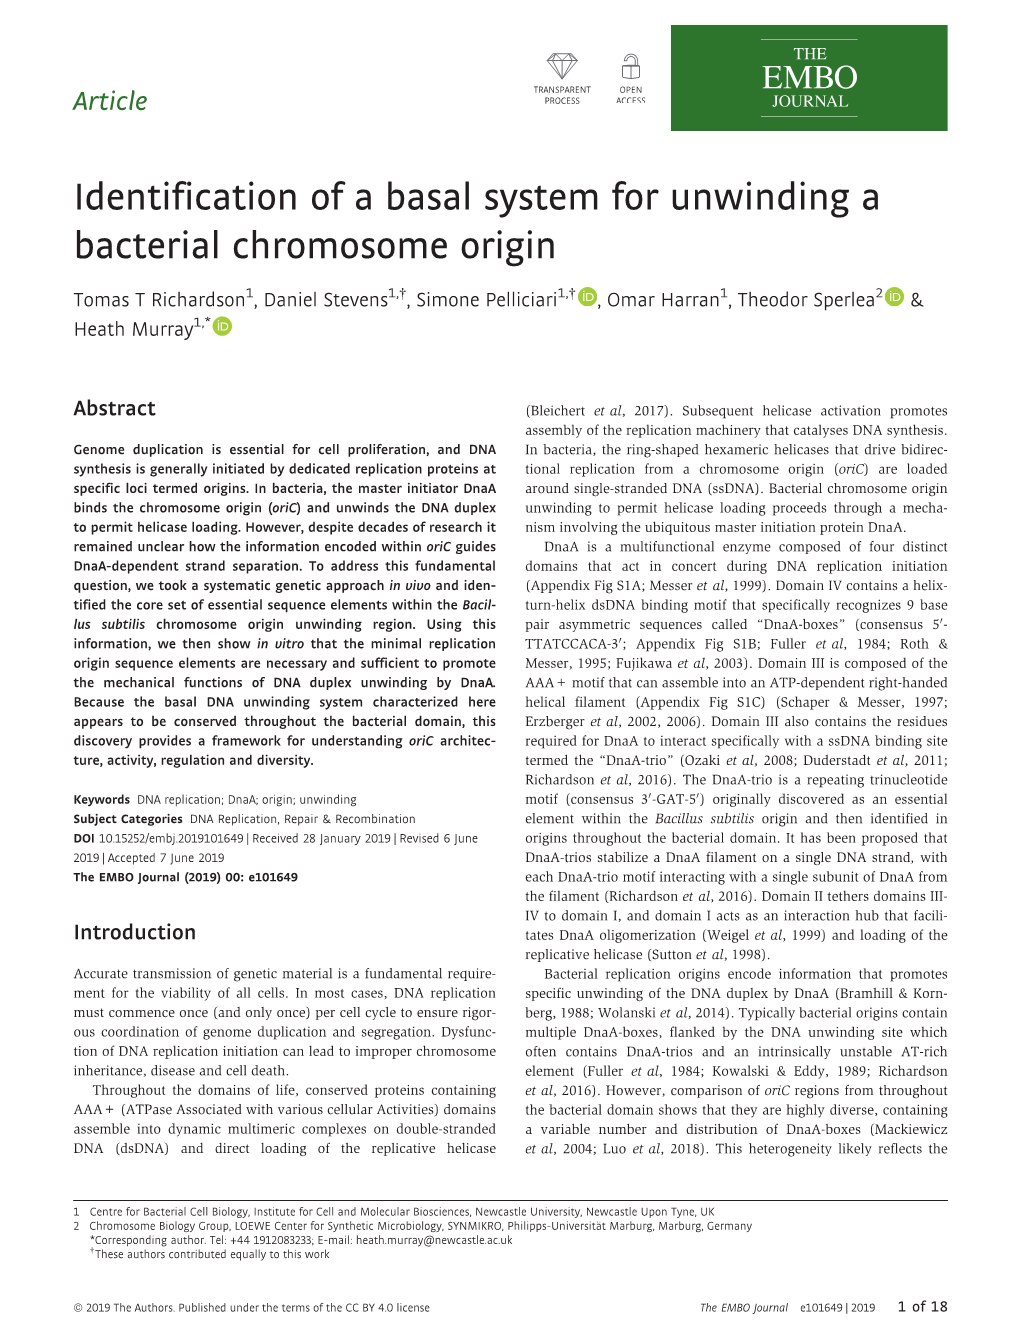 Identification of a Basal System for Unwinding a Bacterial Chromosome Origin